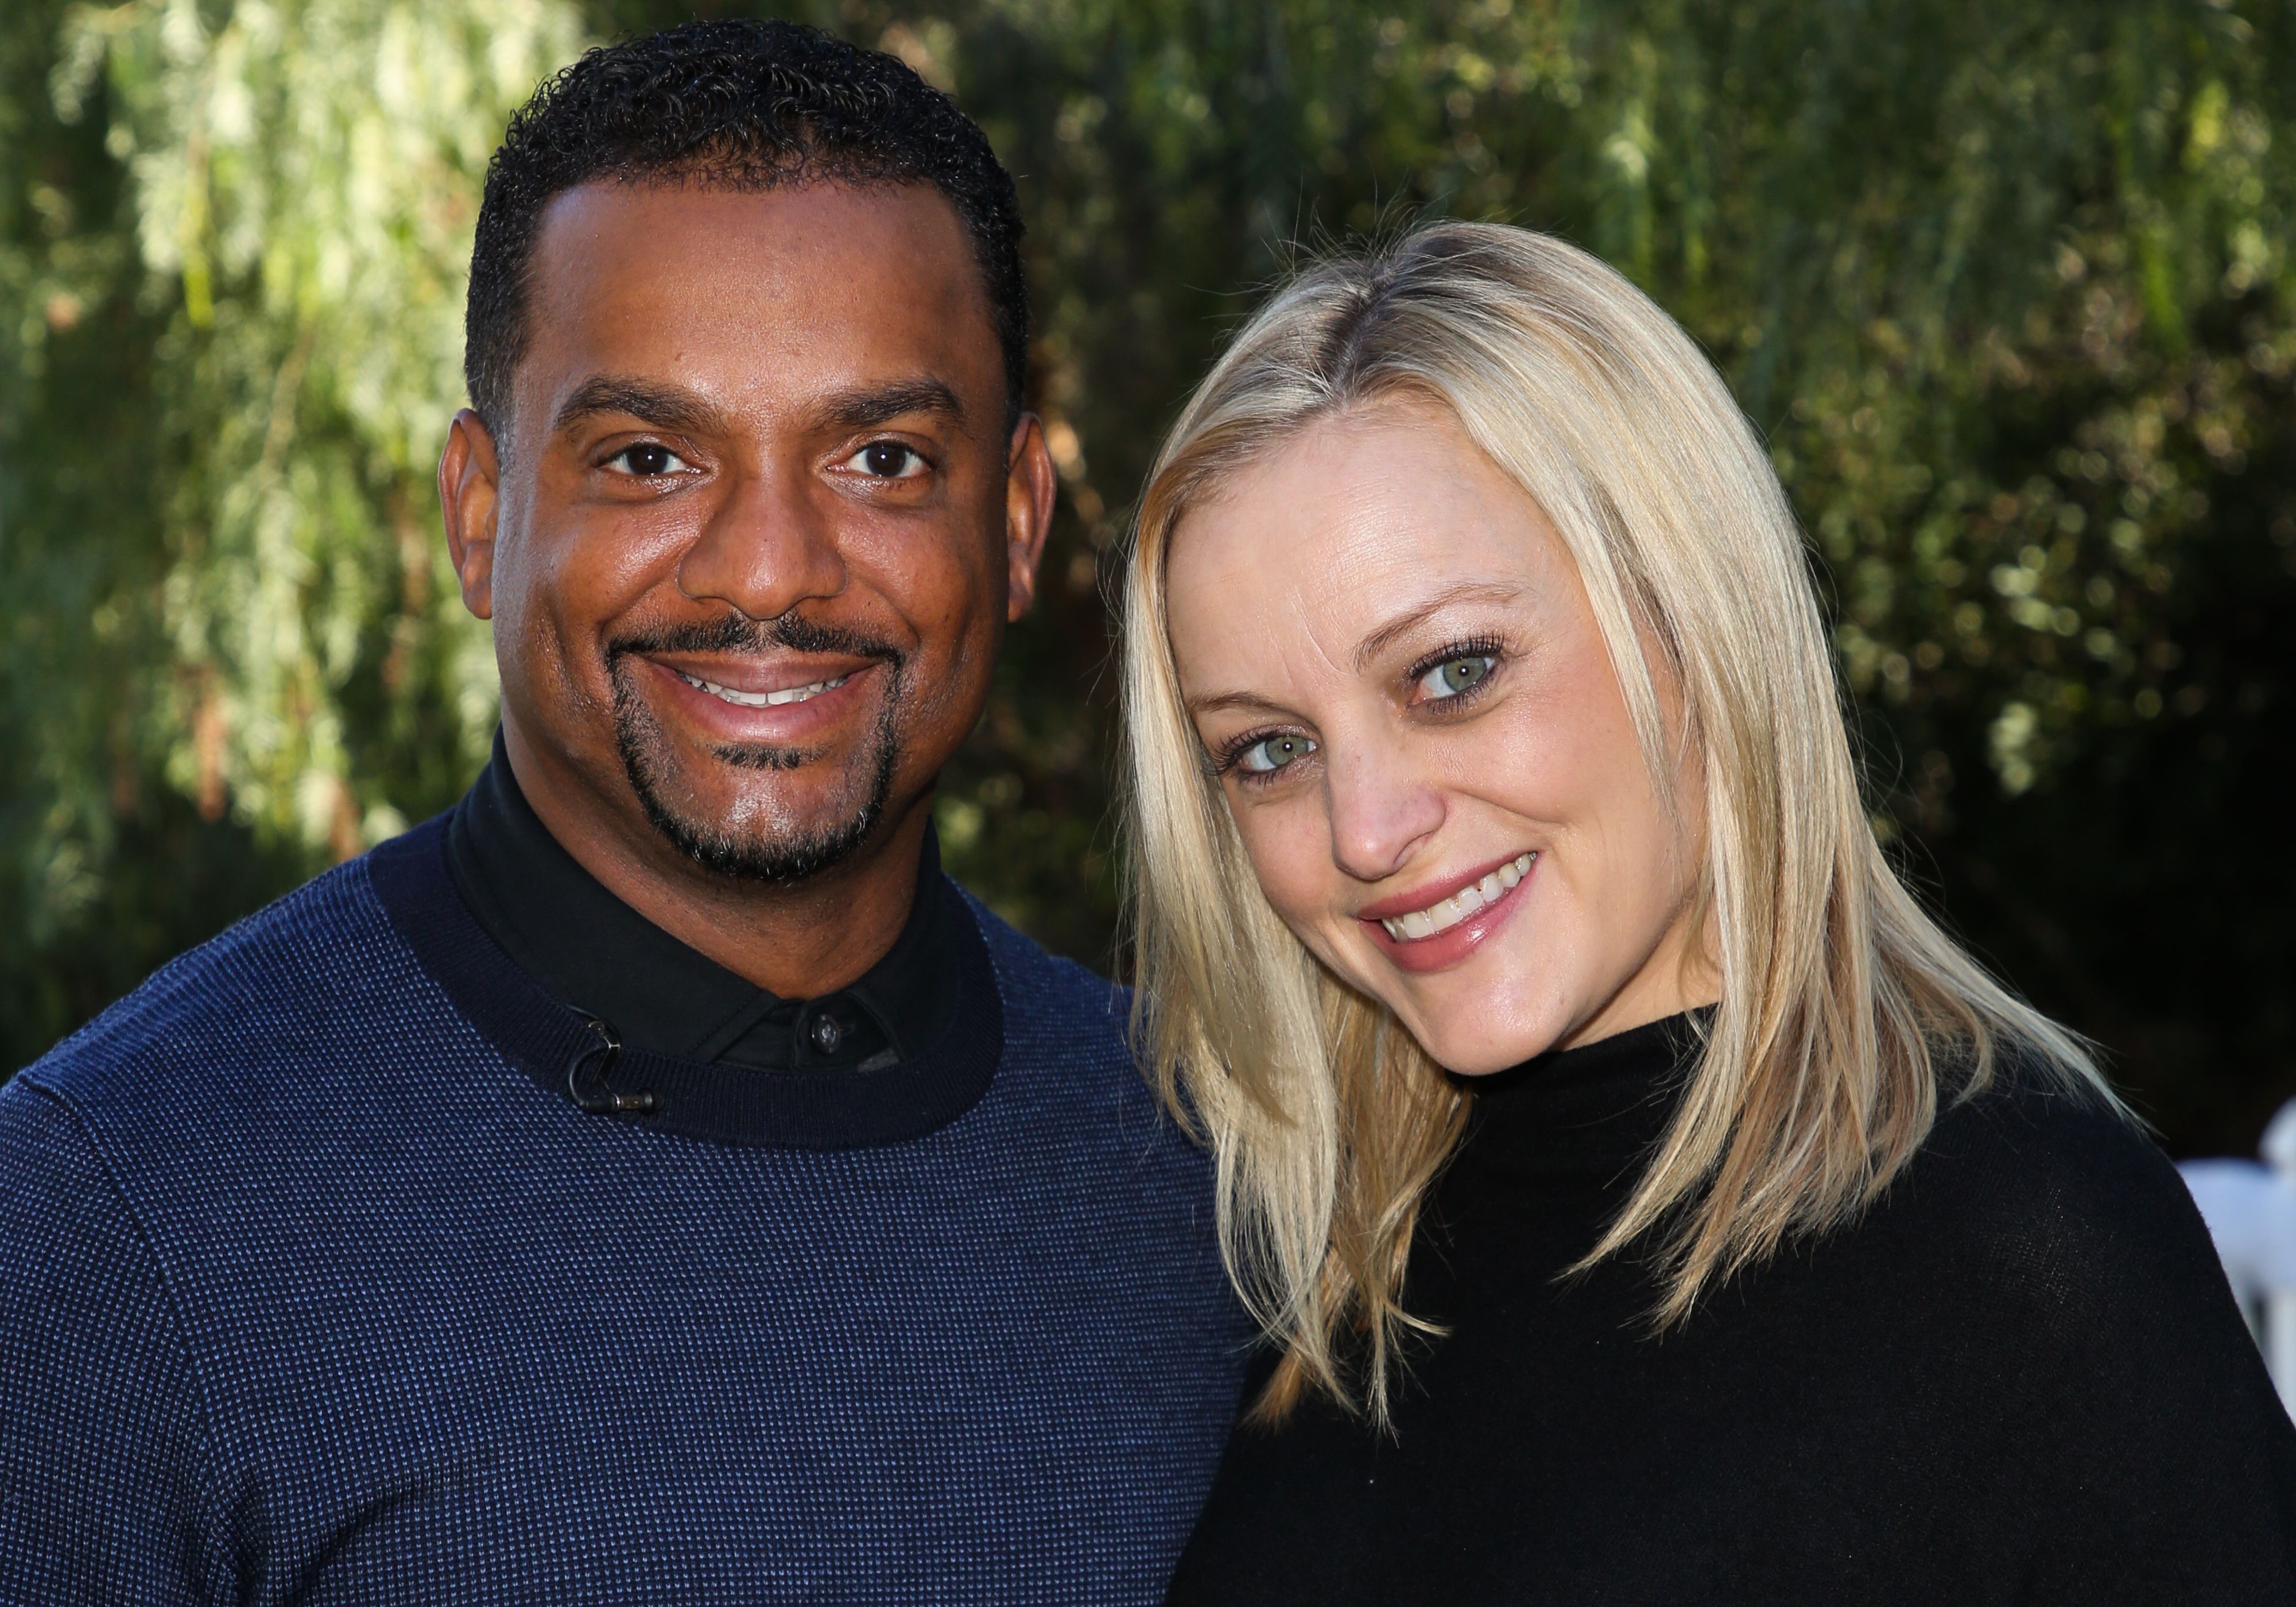  Alfonso Ribeiro  and his Wife Angela Unkrich visit Hallmark's "Home & Family" at Universal Studios Hollywood on December 15, 2018 in Universal City, California | Photo: Getty Images